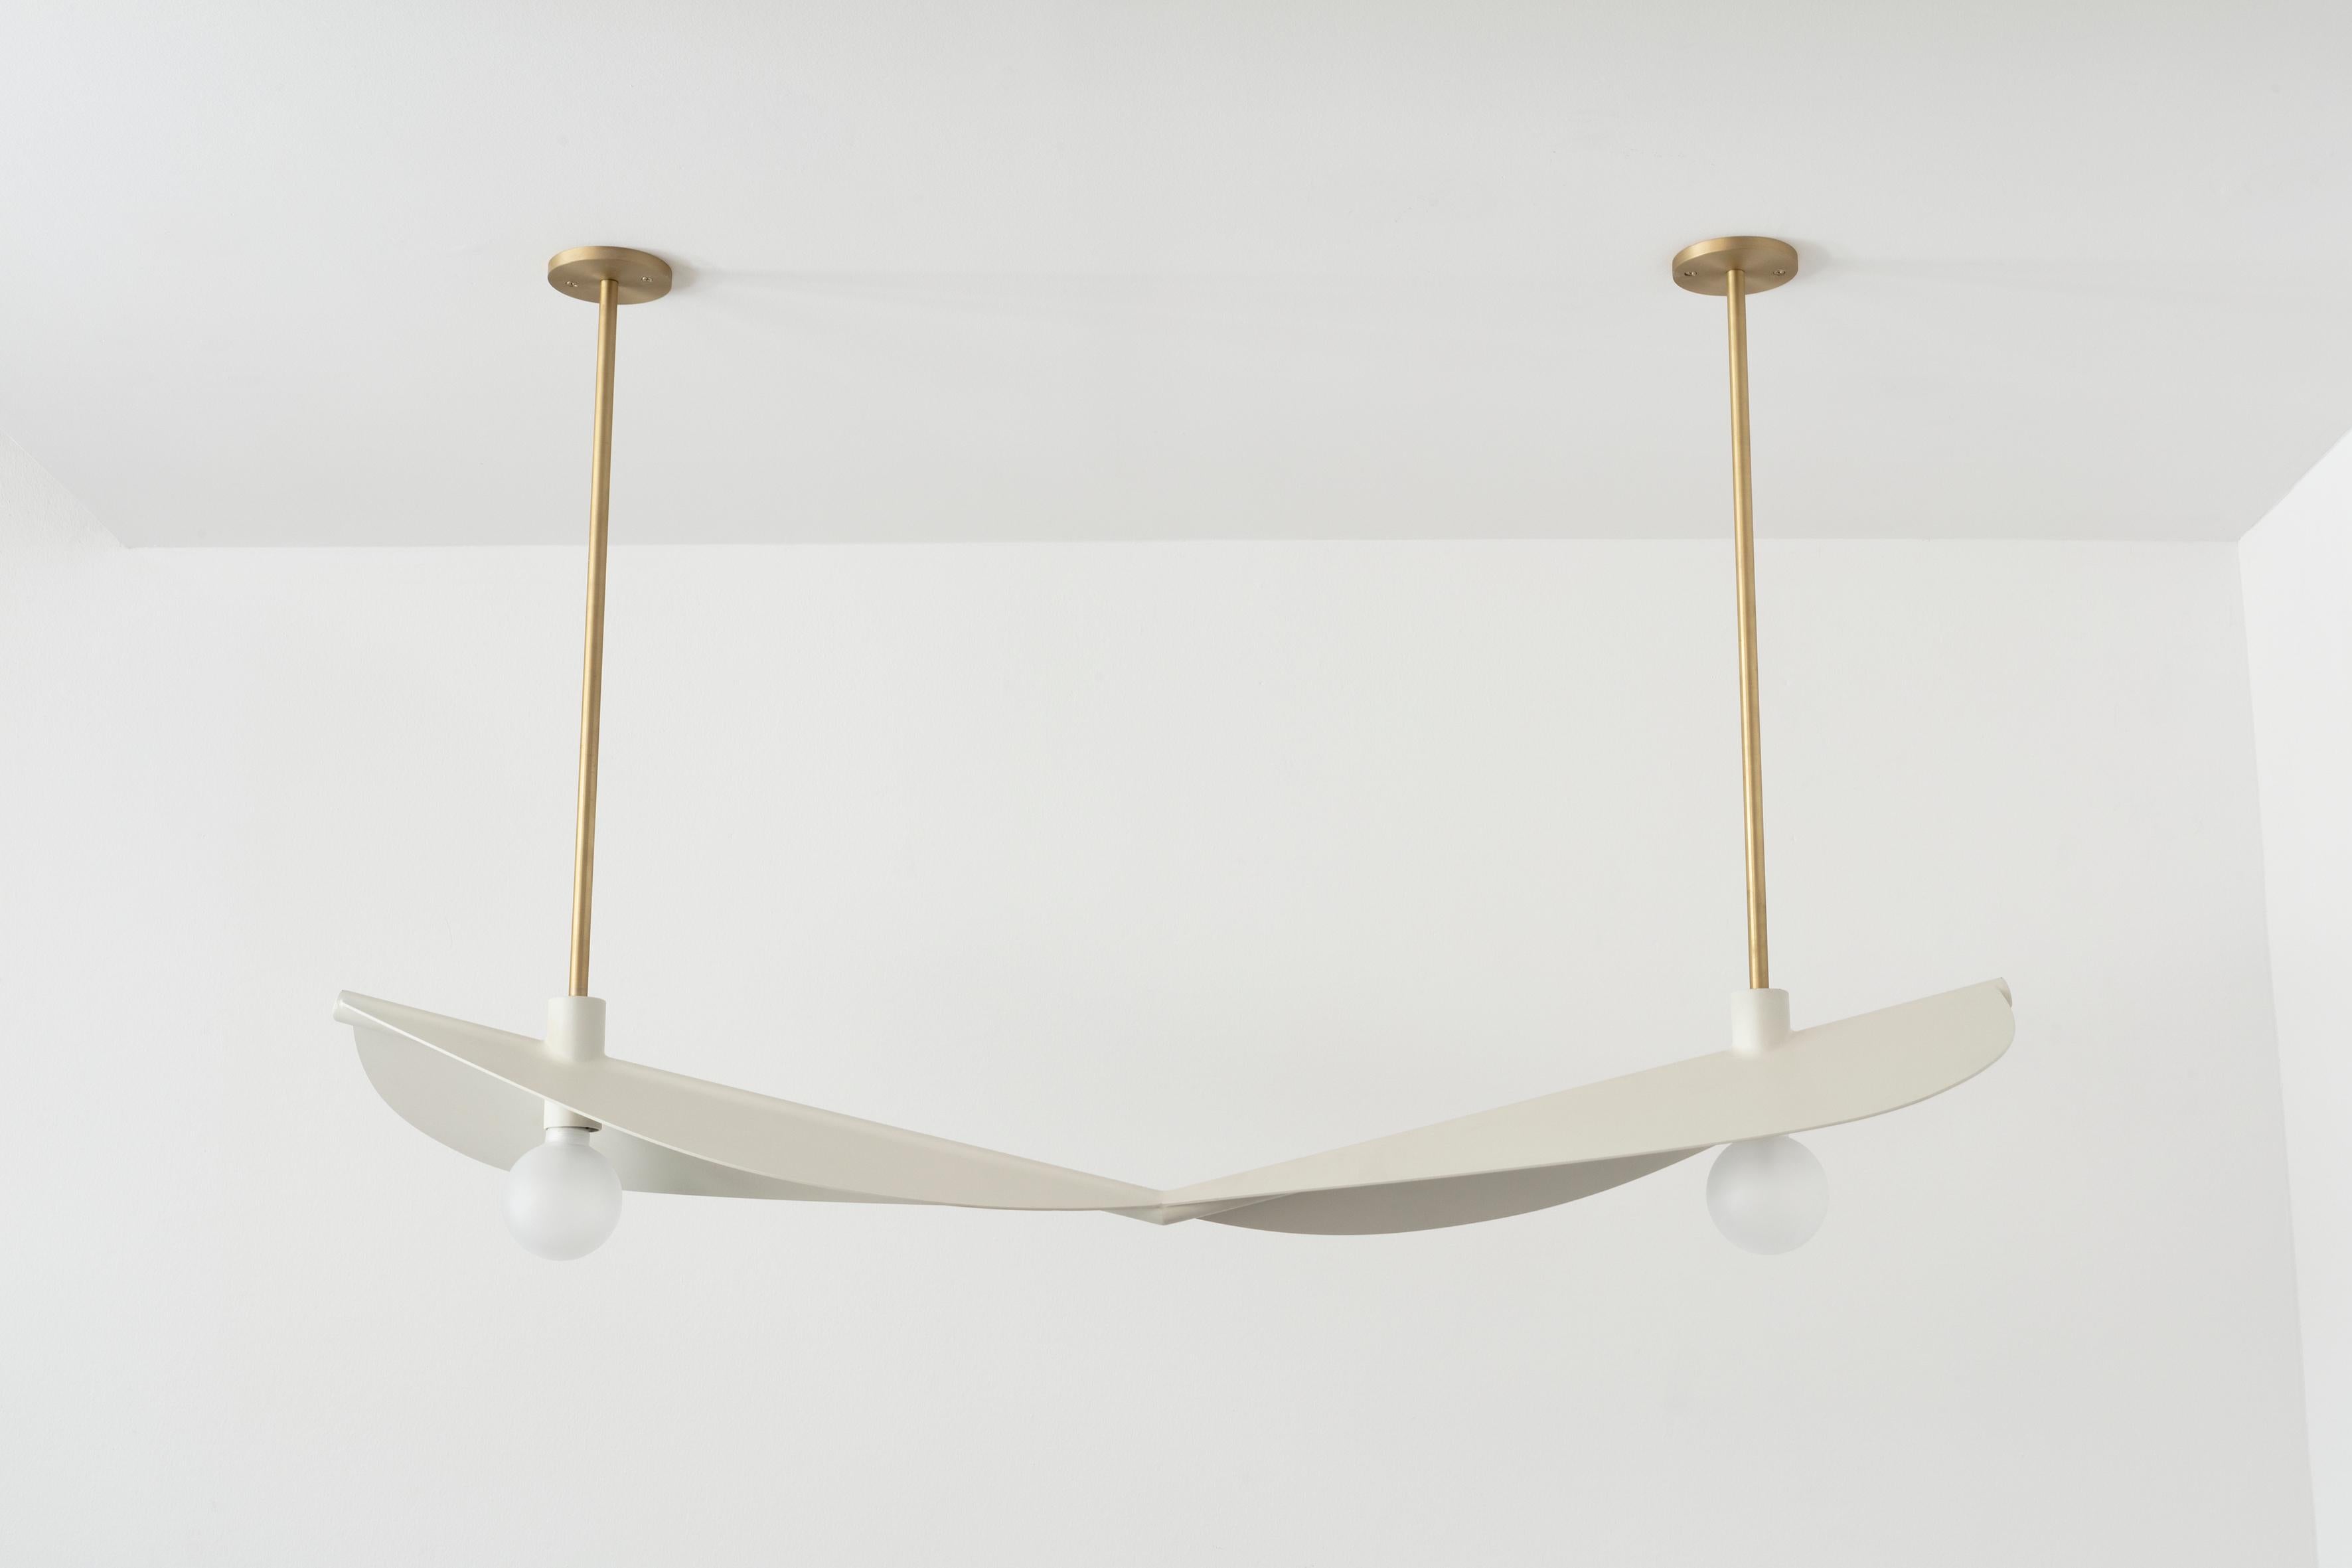 Feuillage duo ceiling mounted, white - Carla Baz
Dimensions: L 140 x W 30 x H 80 cm
Weight: 10 kg
Material: painted steel, brass

Feuillage is a lighting installation composed of fine metal leaves delicately welded on a branch holding frosted